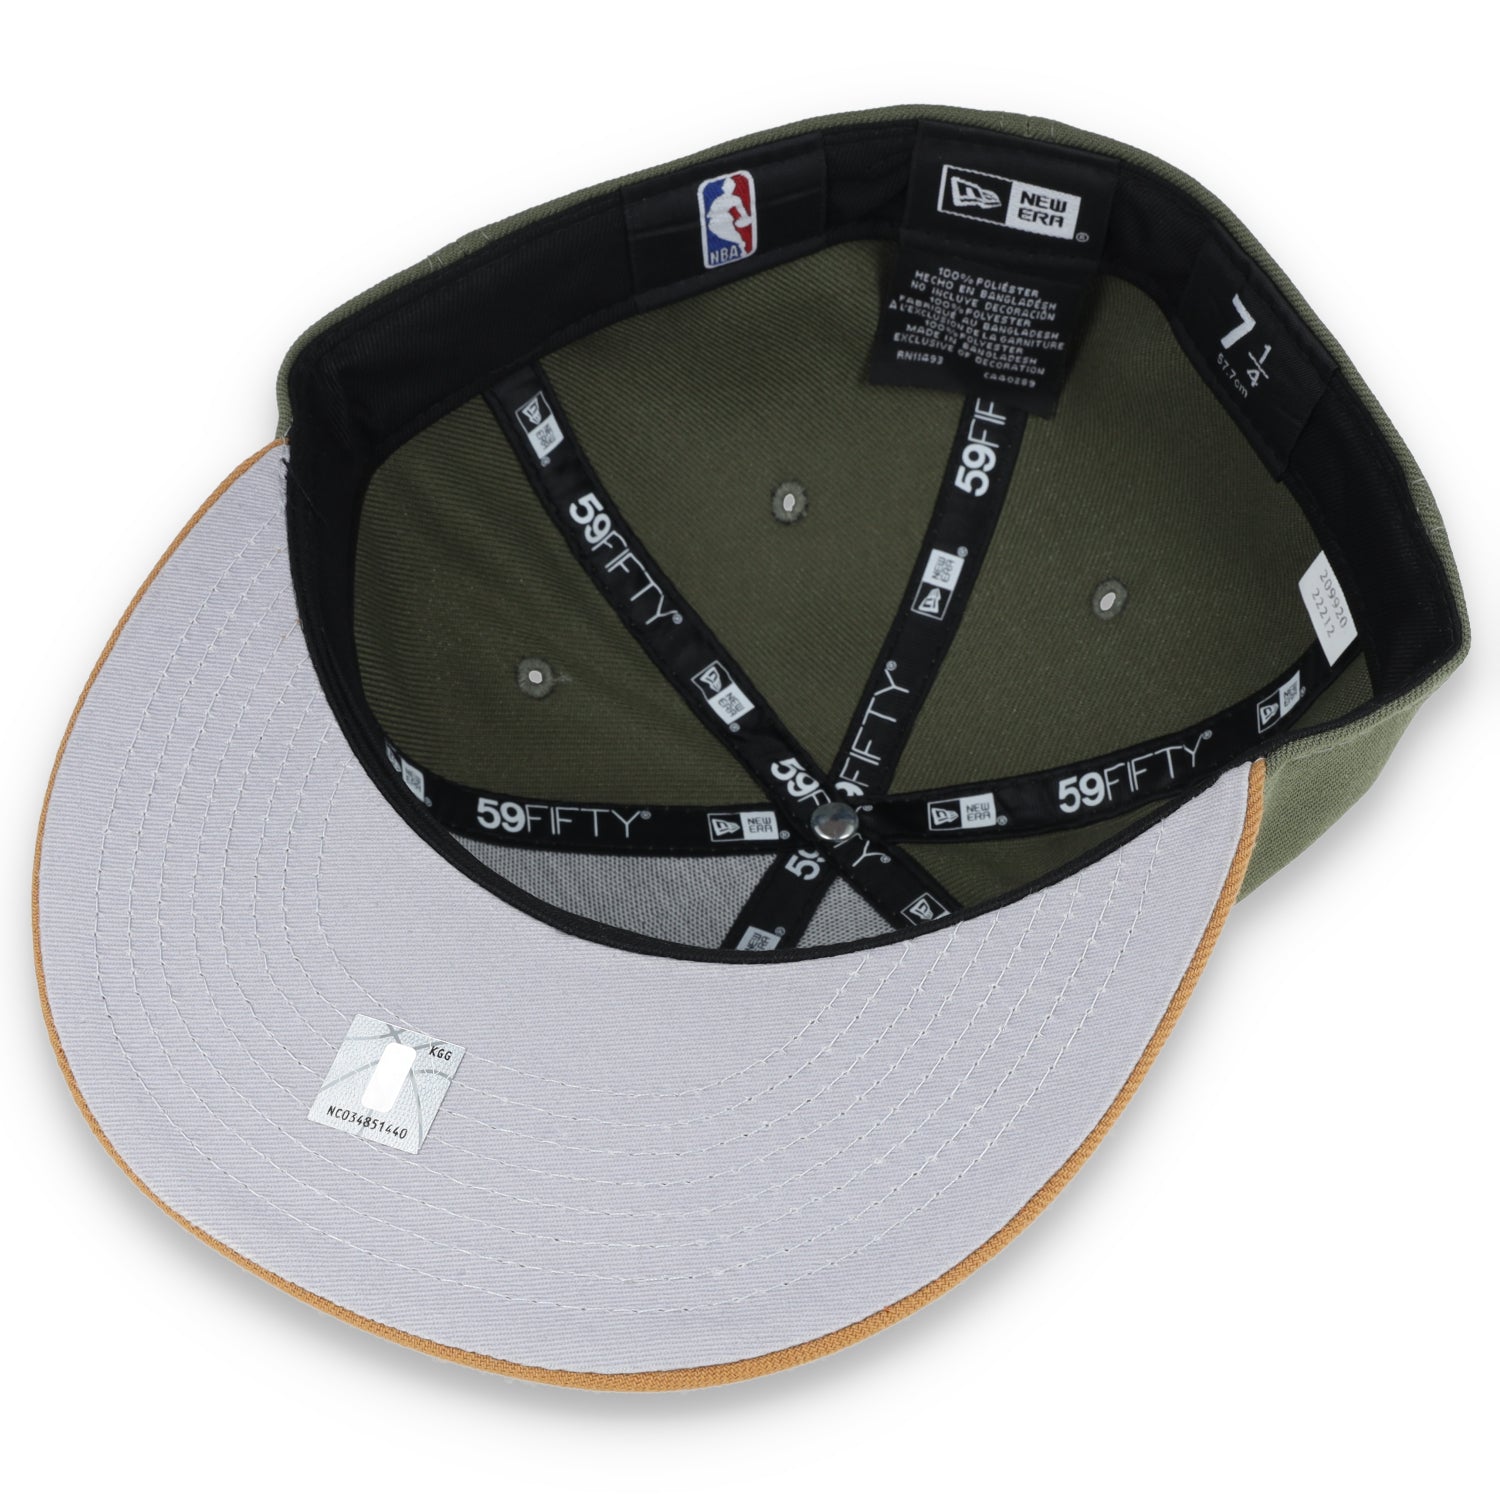 NEW ERA GOLDEN STATE WARRIORS COLOR PACK 2TONE 59FIFTY FITTED HAT- OLIVE/TAN